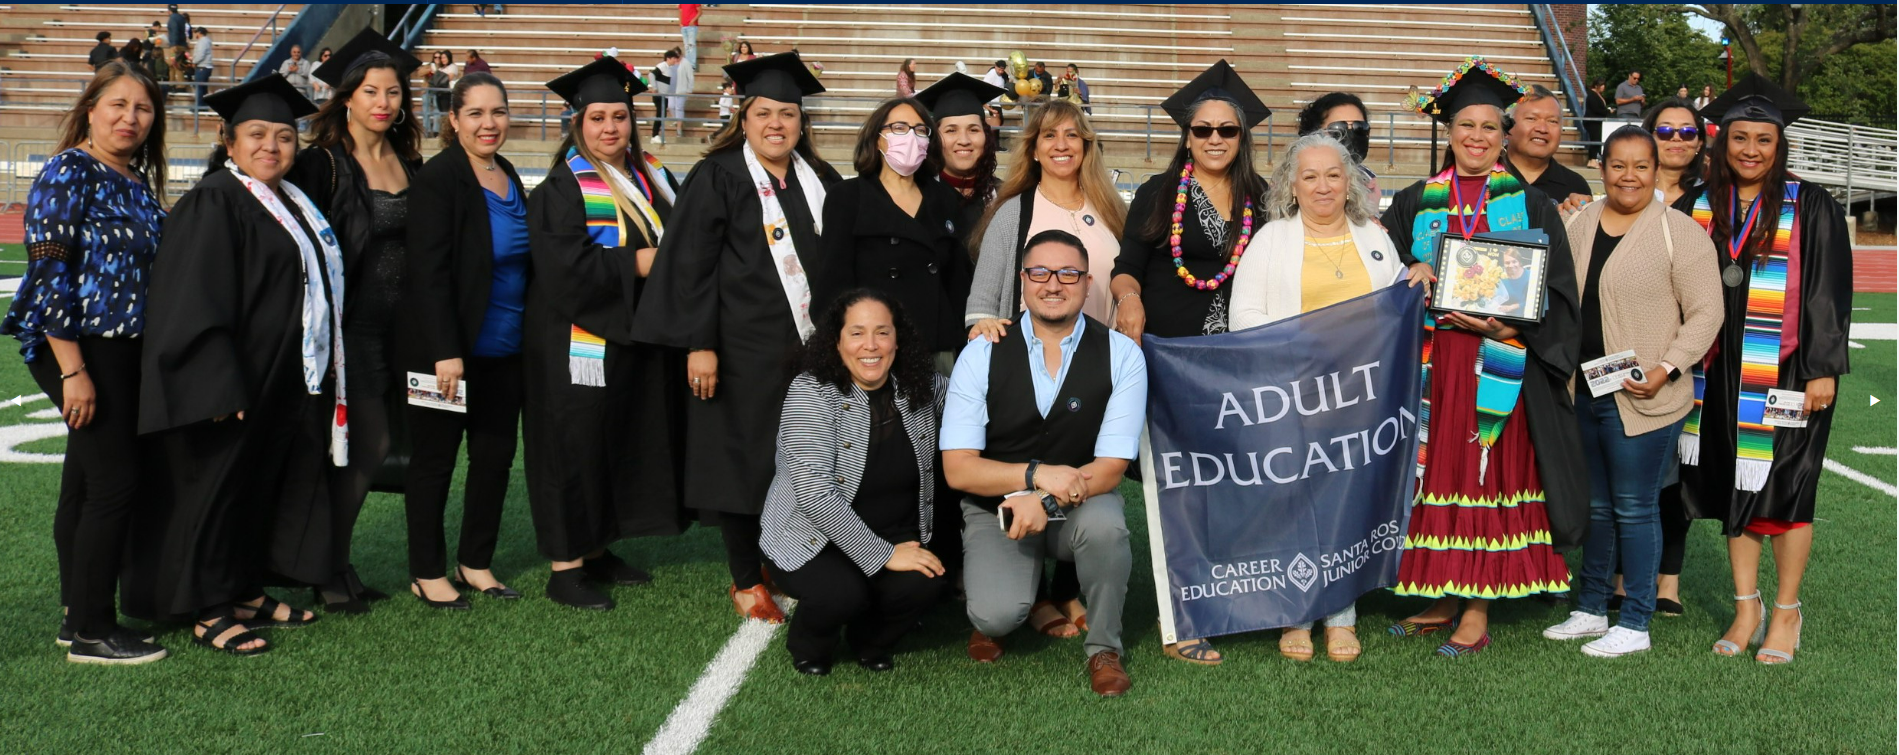 Adult Education Students at Celebrate CE ceremony